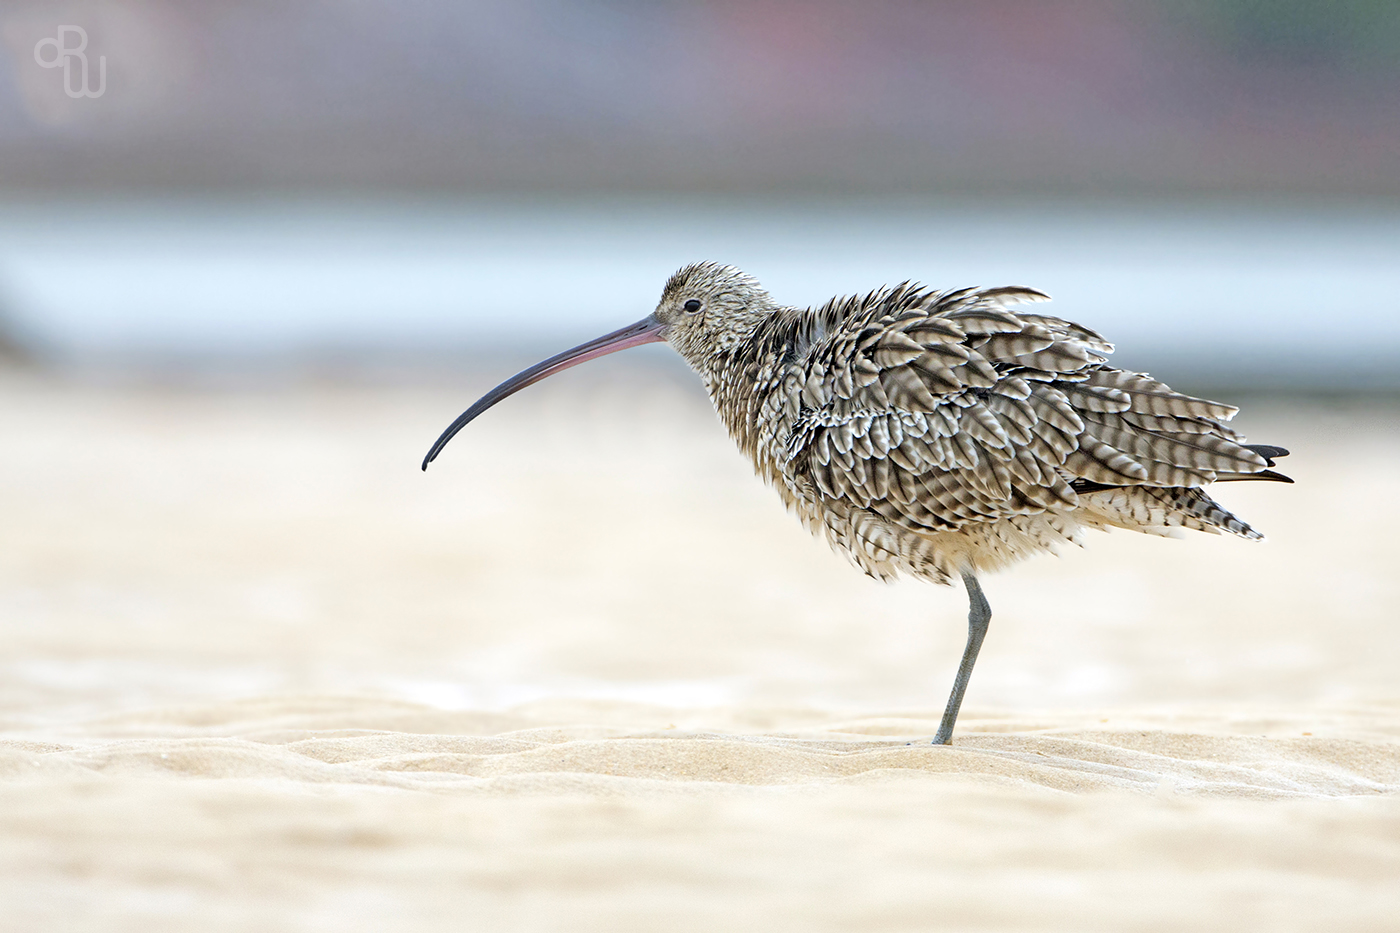 The eastern curlew migrates from Australia to Russia